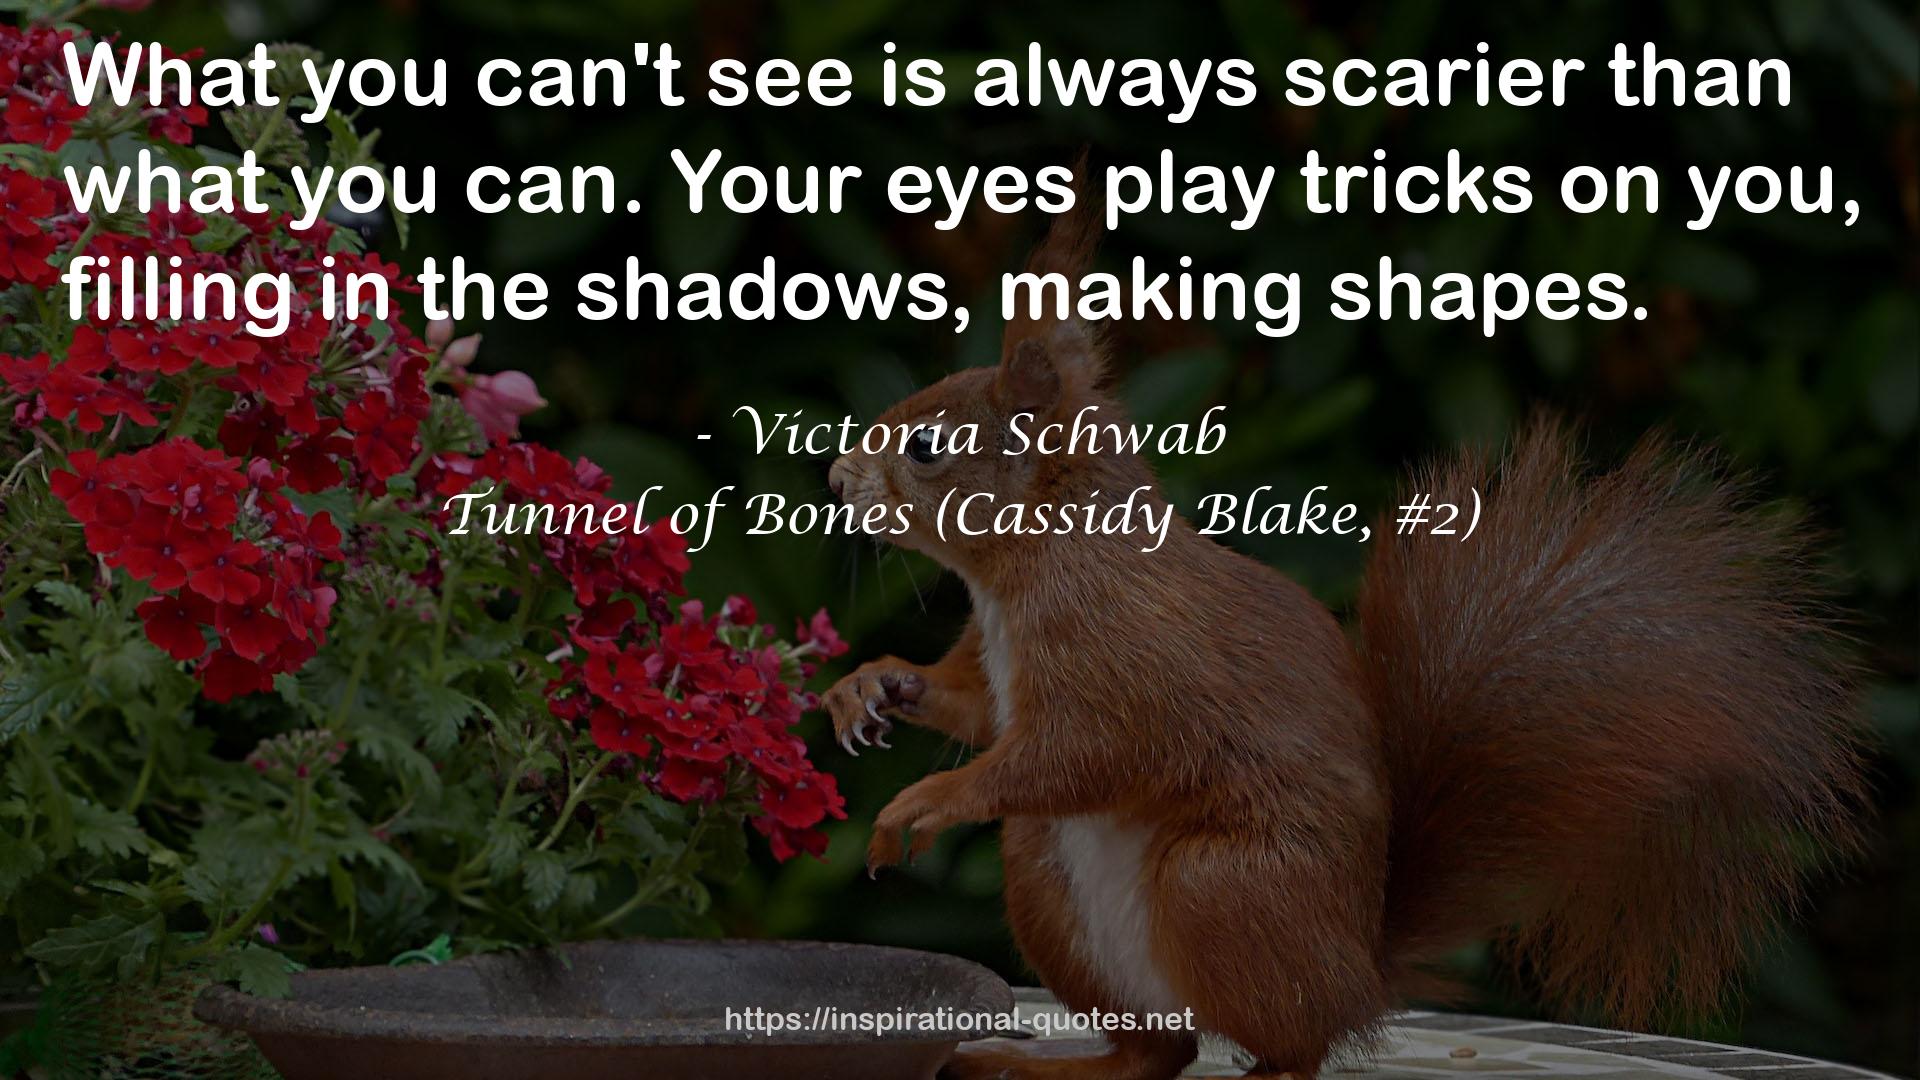 Tunnel of Bones (Cassidy Blake, #2) QUOTES